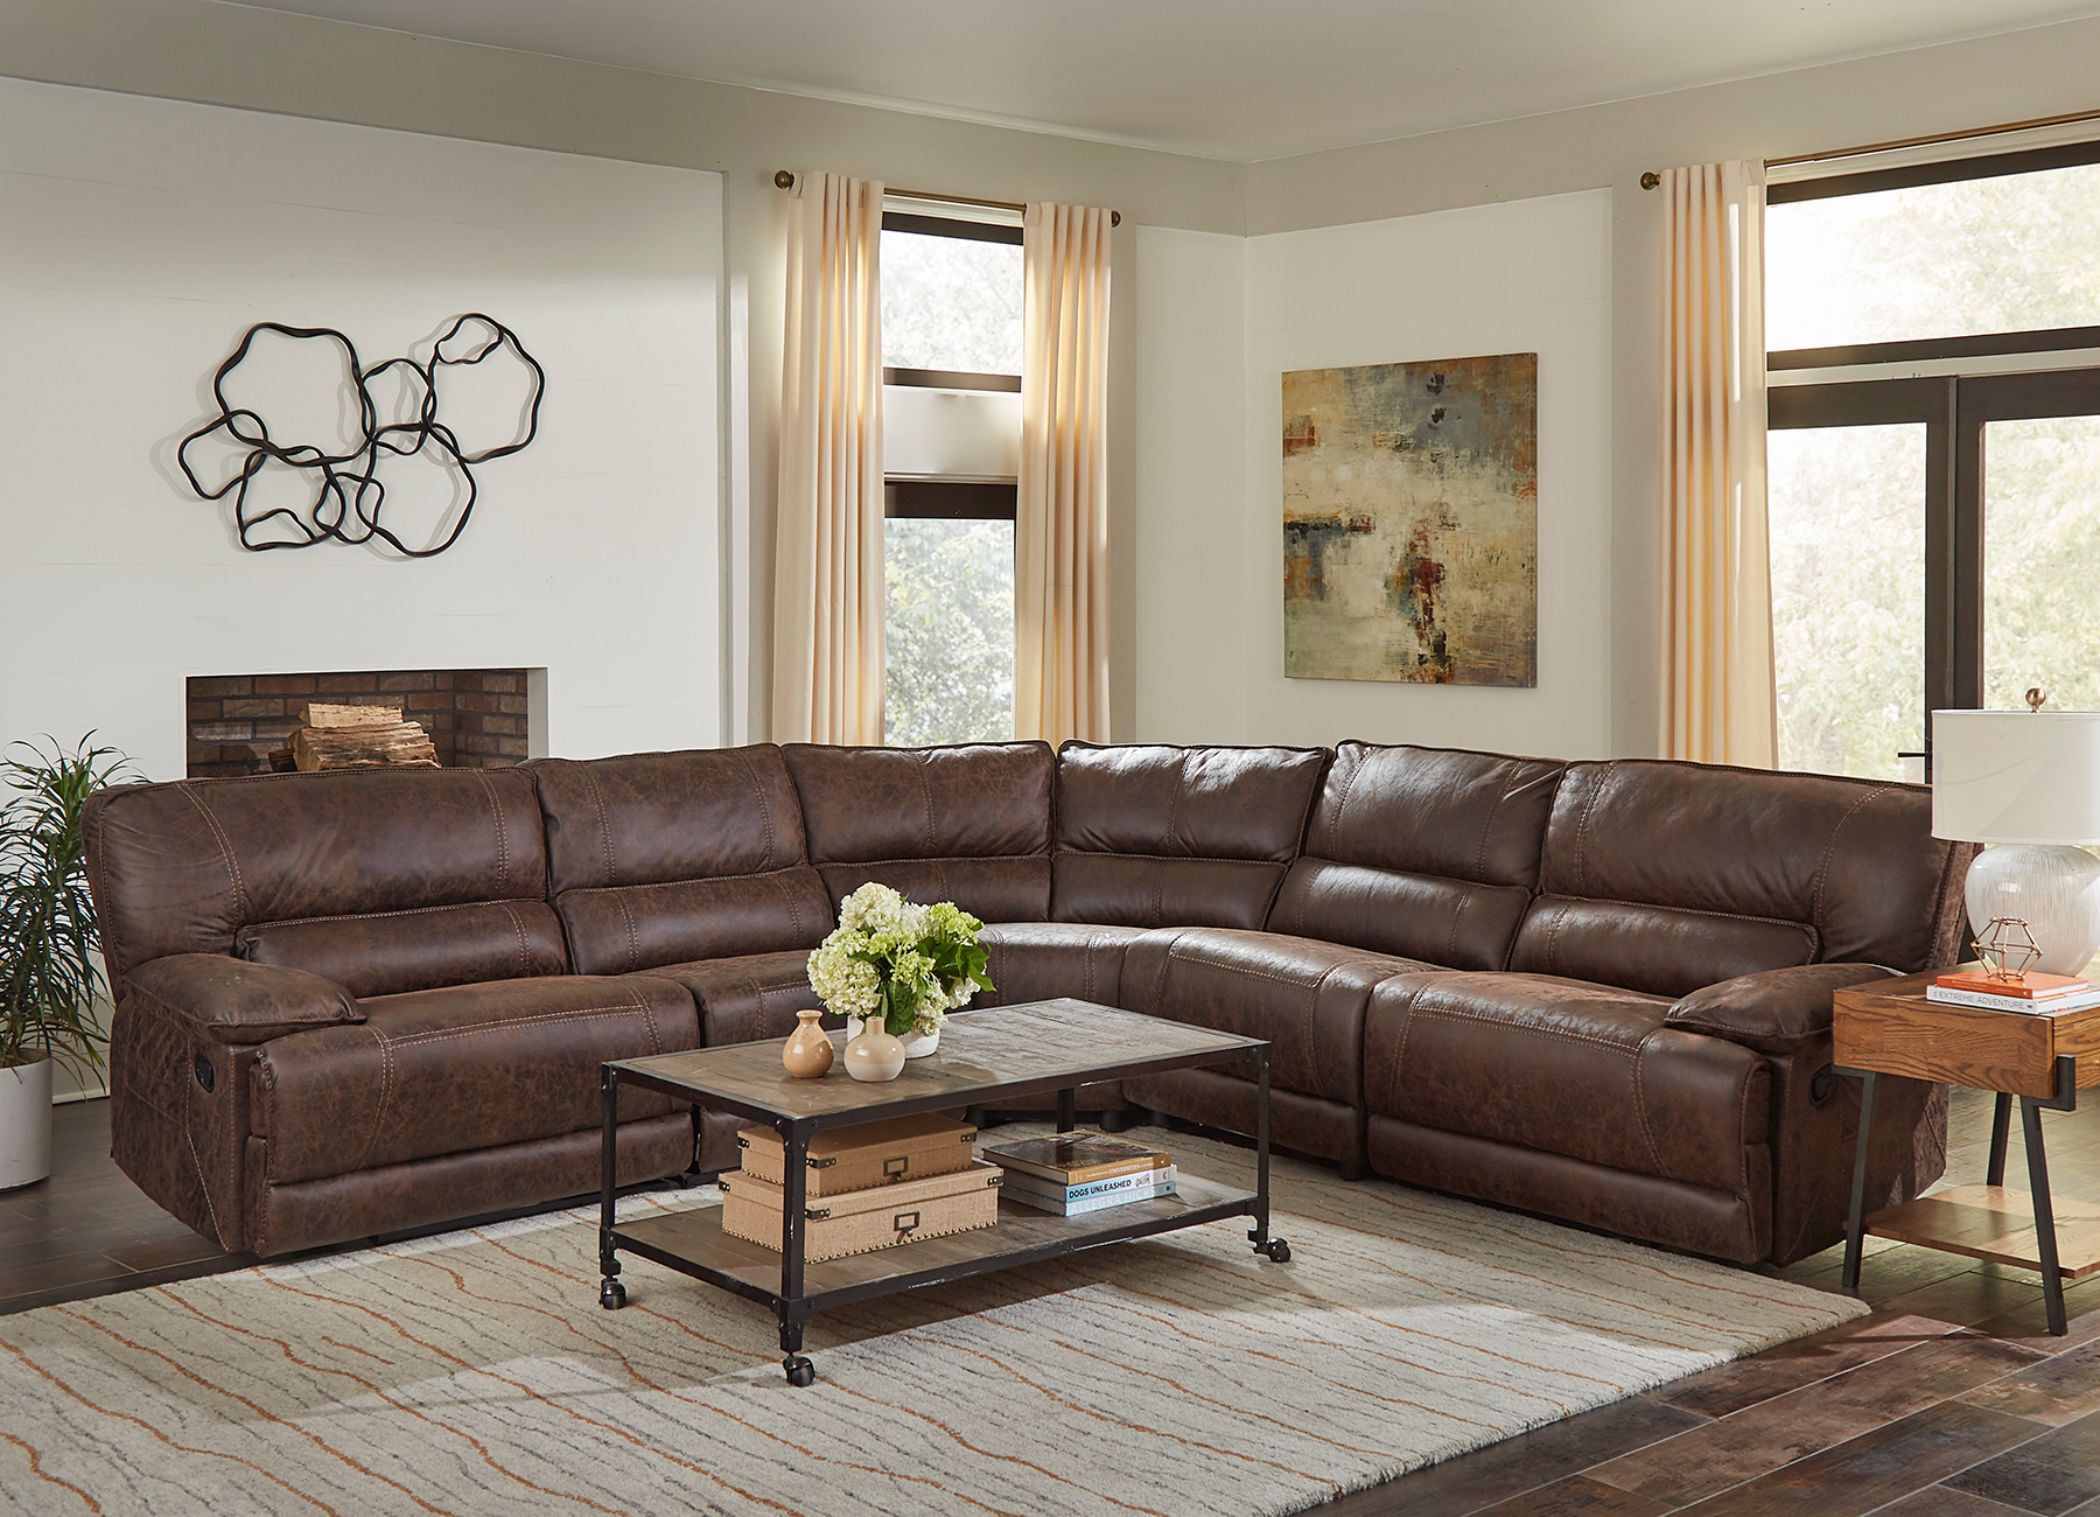 Malyn Weathered Brown Faux Leather Reclining Sectional Sofa With In Faux Leather Sectional Sofa Sets (View 6 of 21)